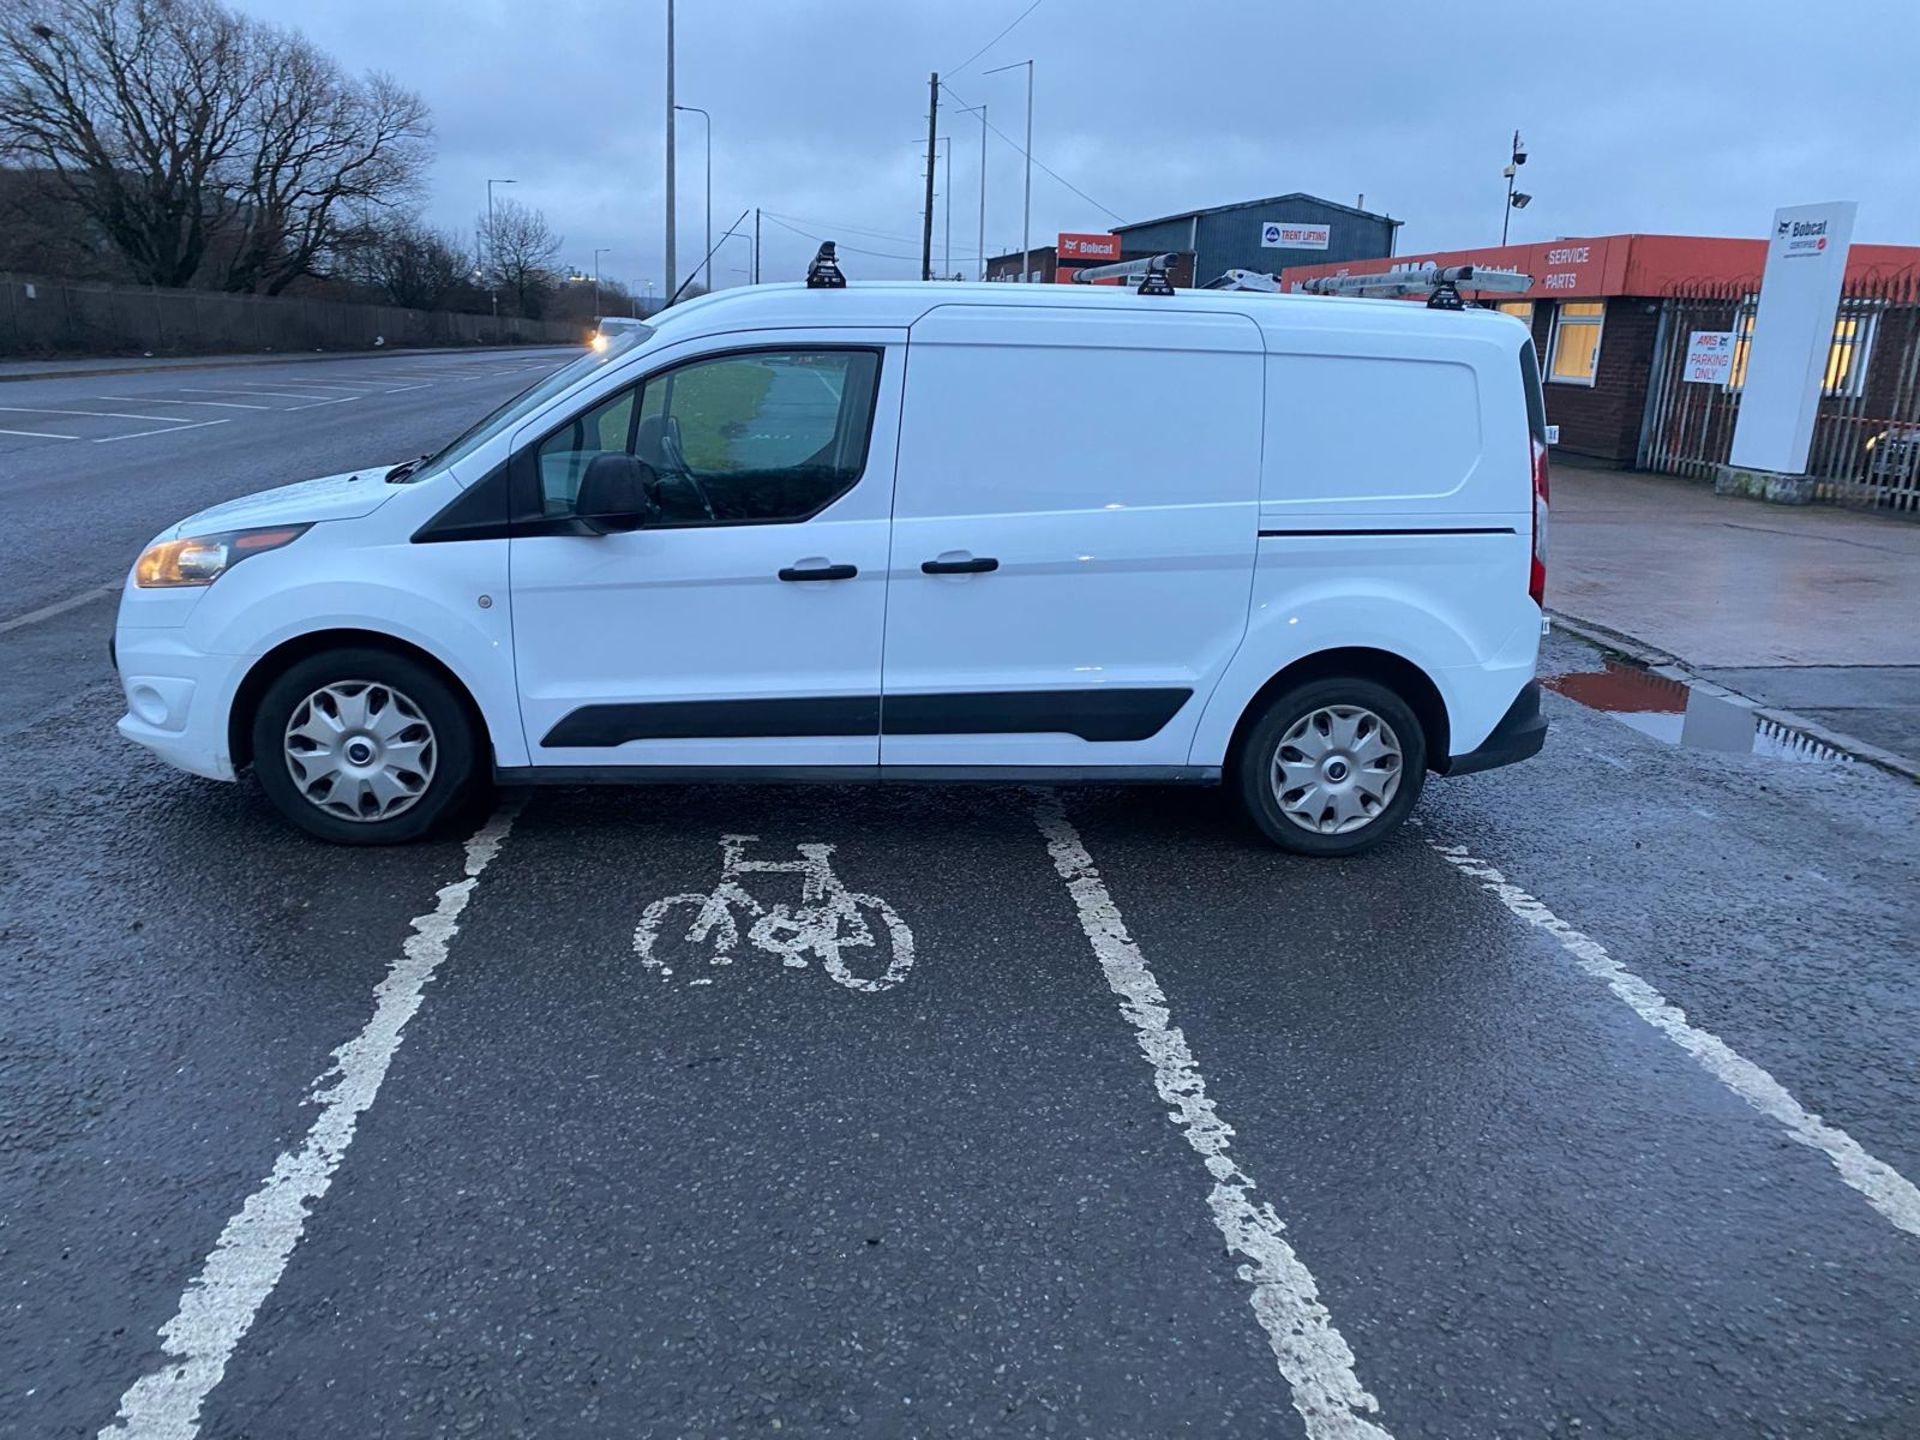 2018 18 FORD TRANSIT CONNECT TREND PAENL VAN - 128K MILES - EURO 6 - 3 SEATS - LWB - ROOF RACK. - Image 8 of 13